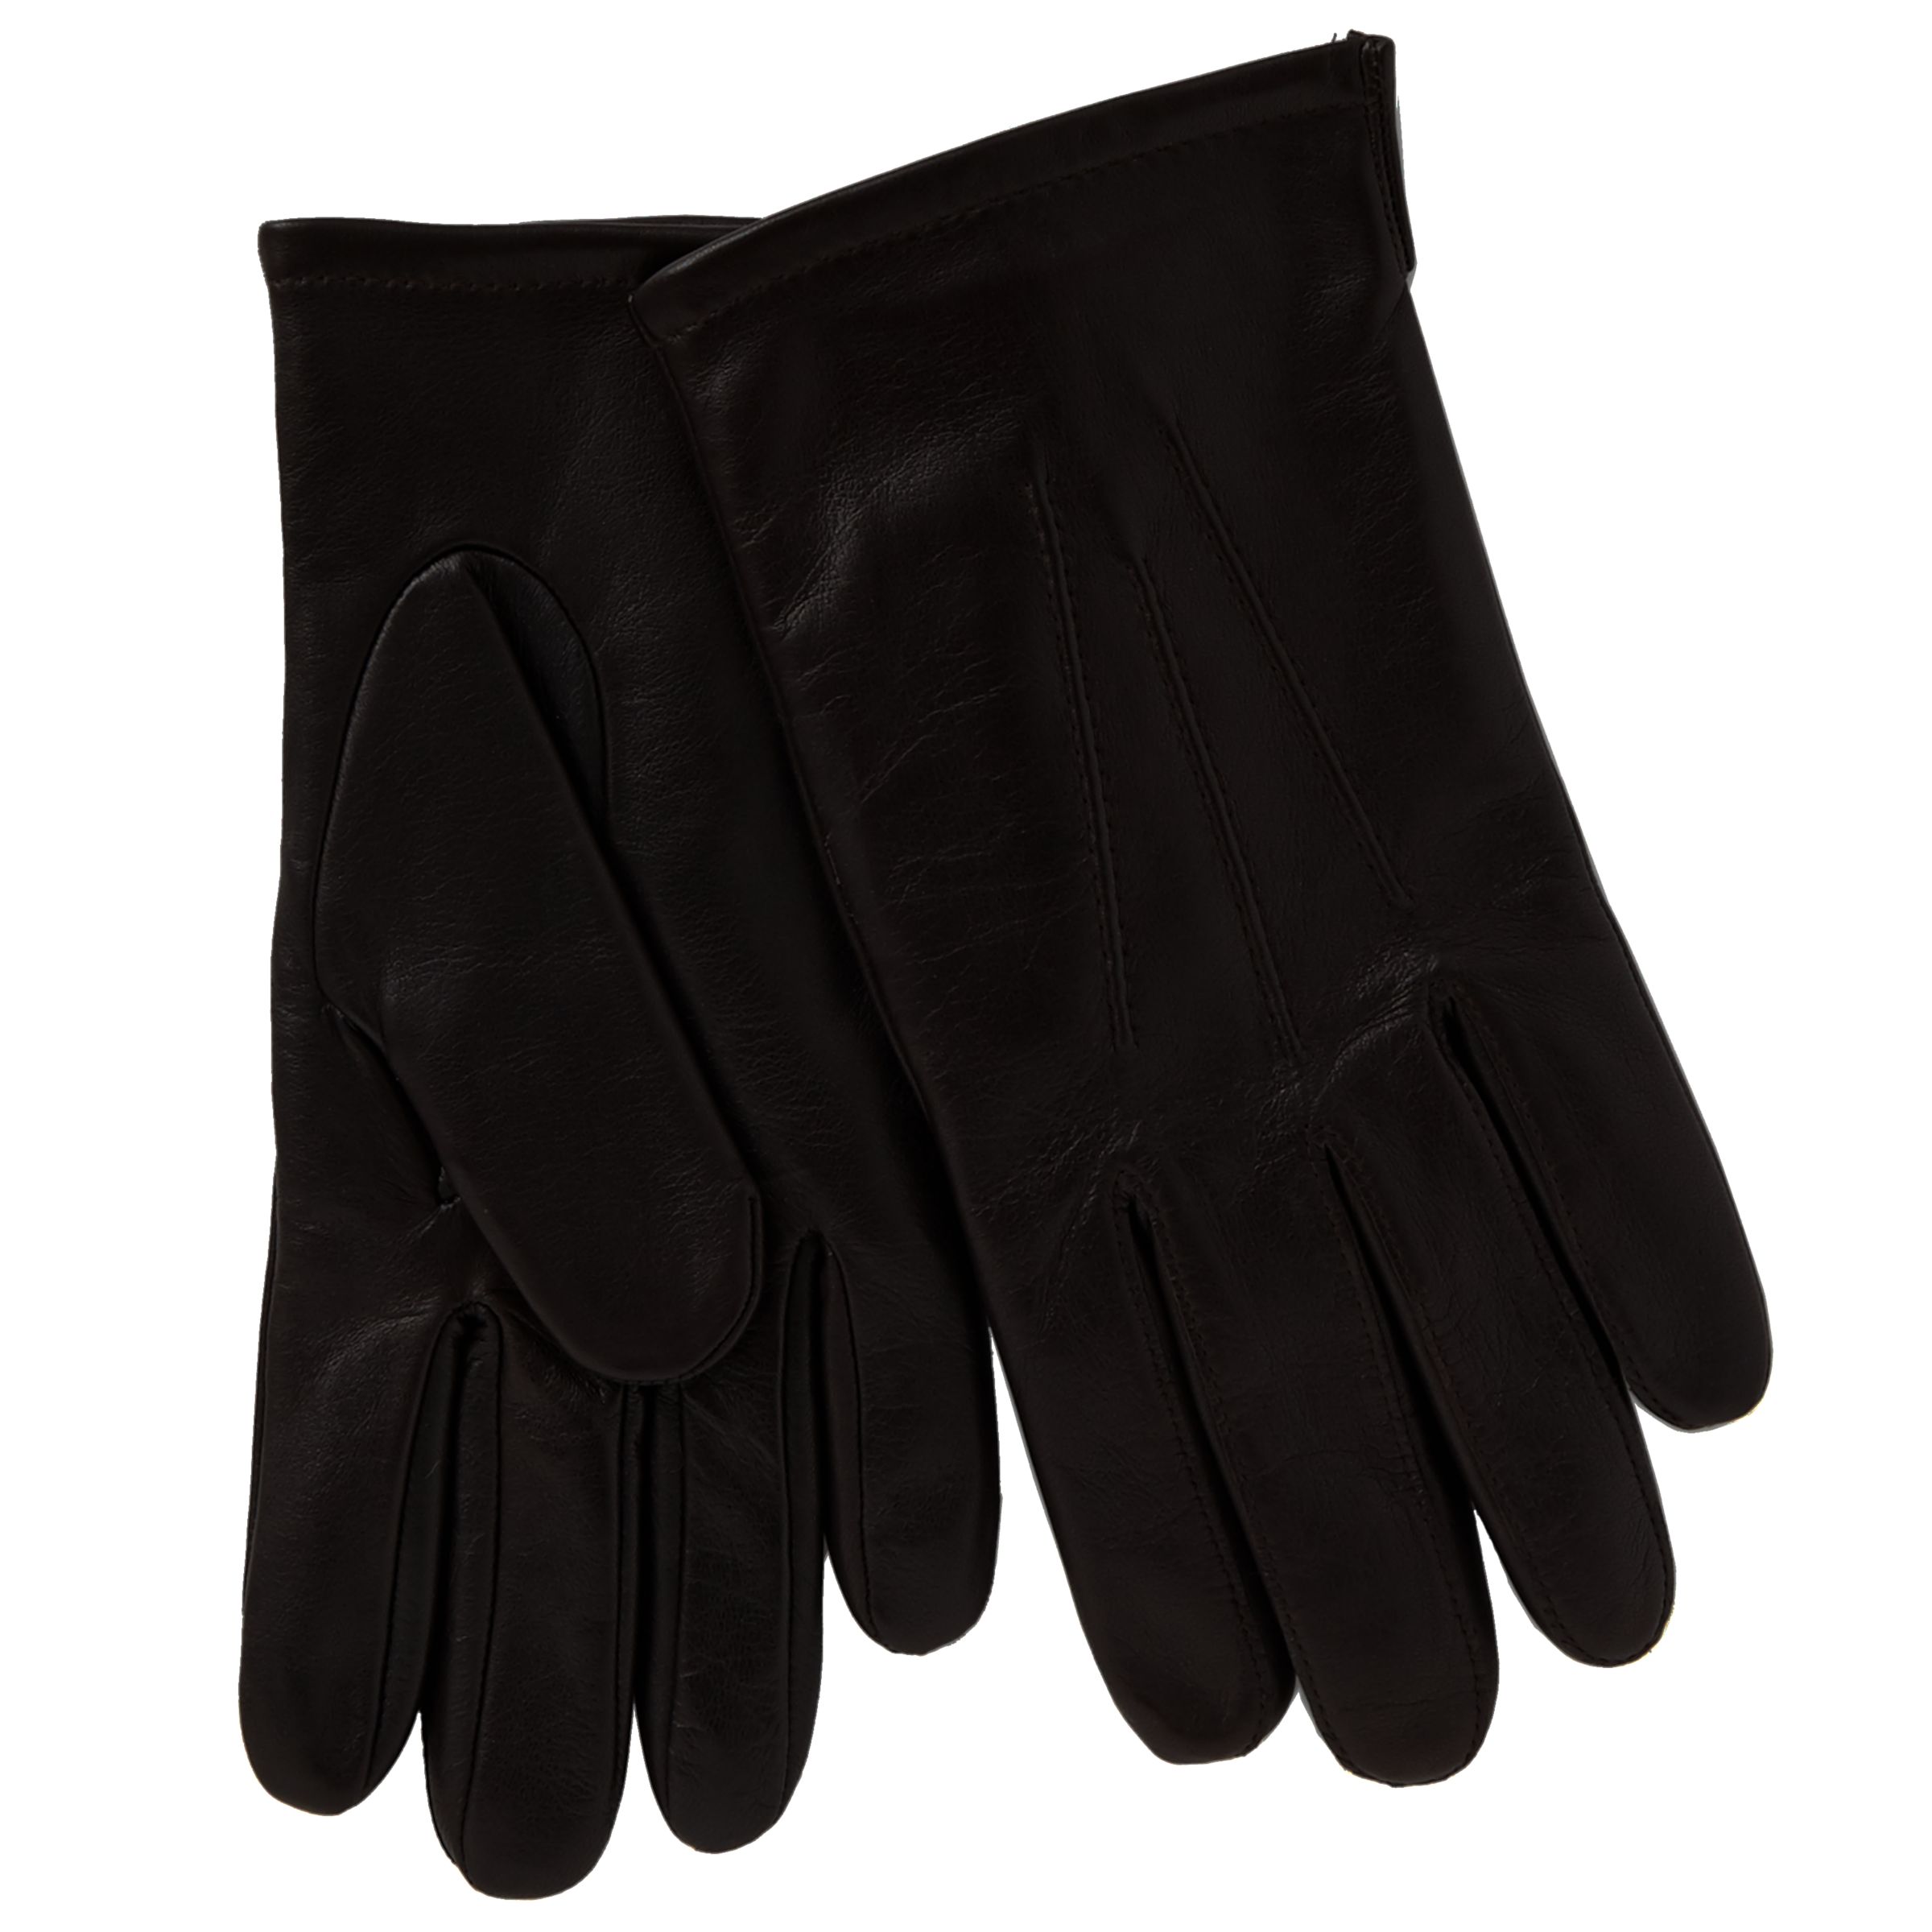 John Lewis & Partners Fleece Lined Leather Gloves, Brown